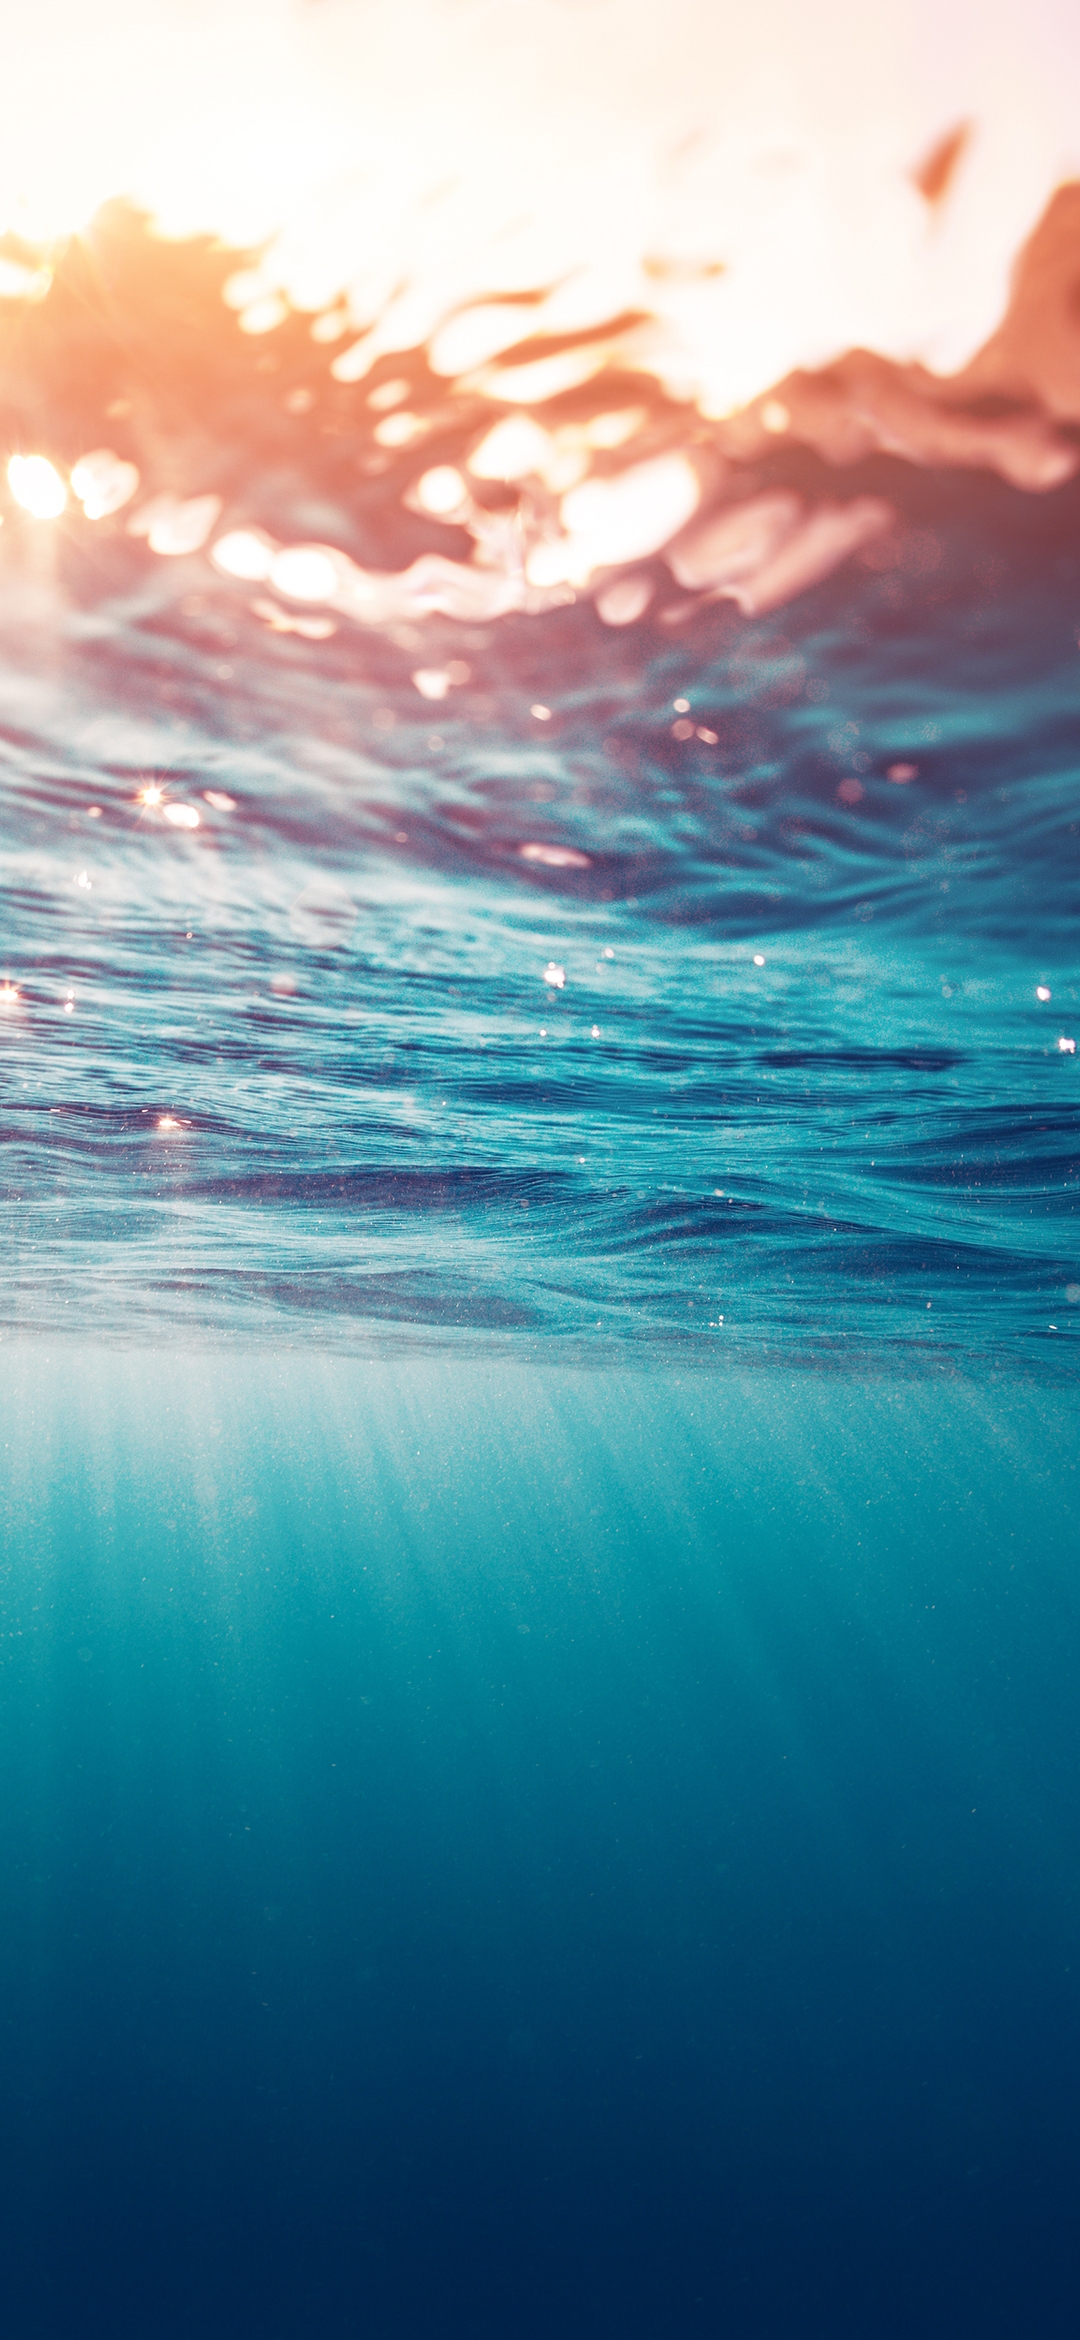 Image: Sea, water, surface, light, rays, waves